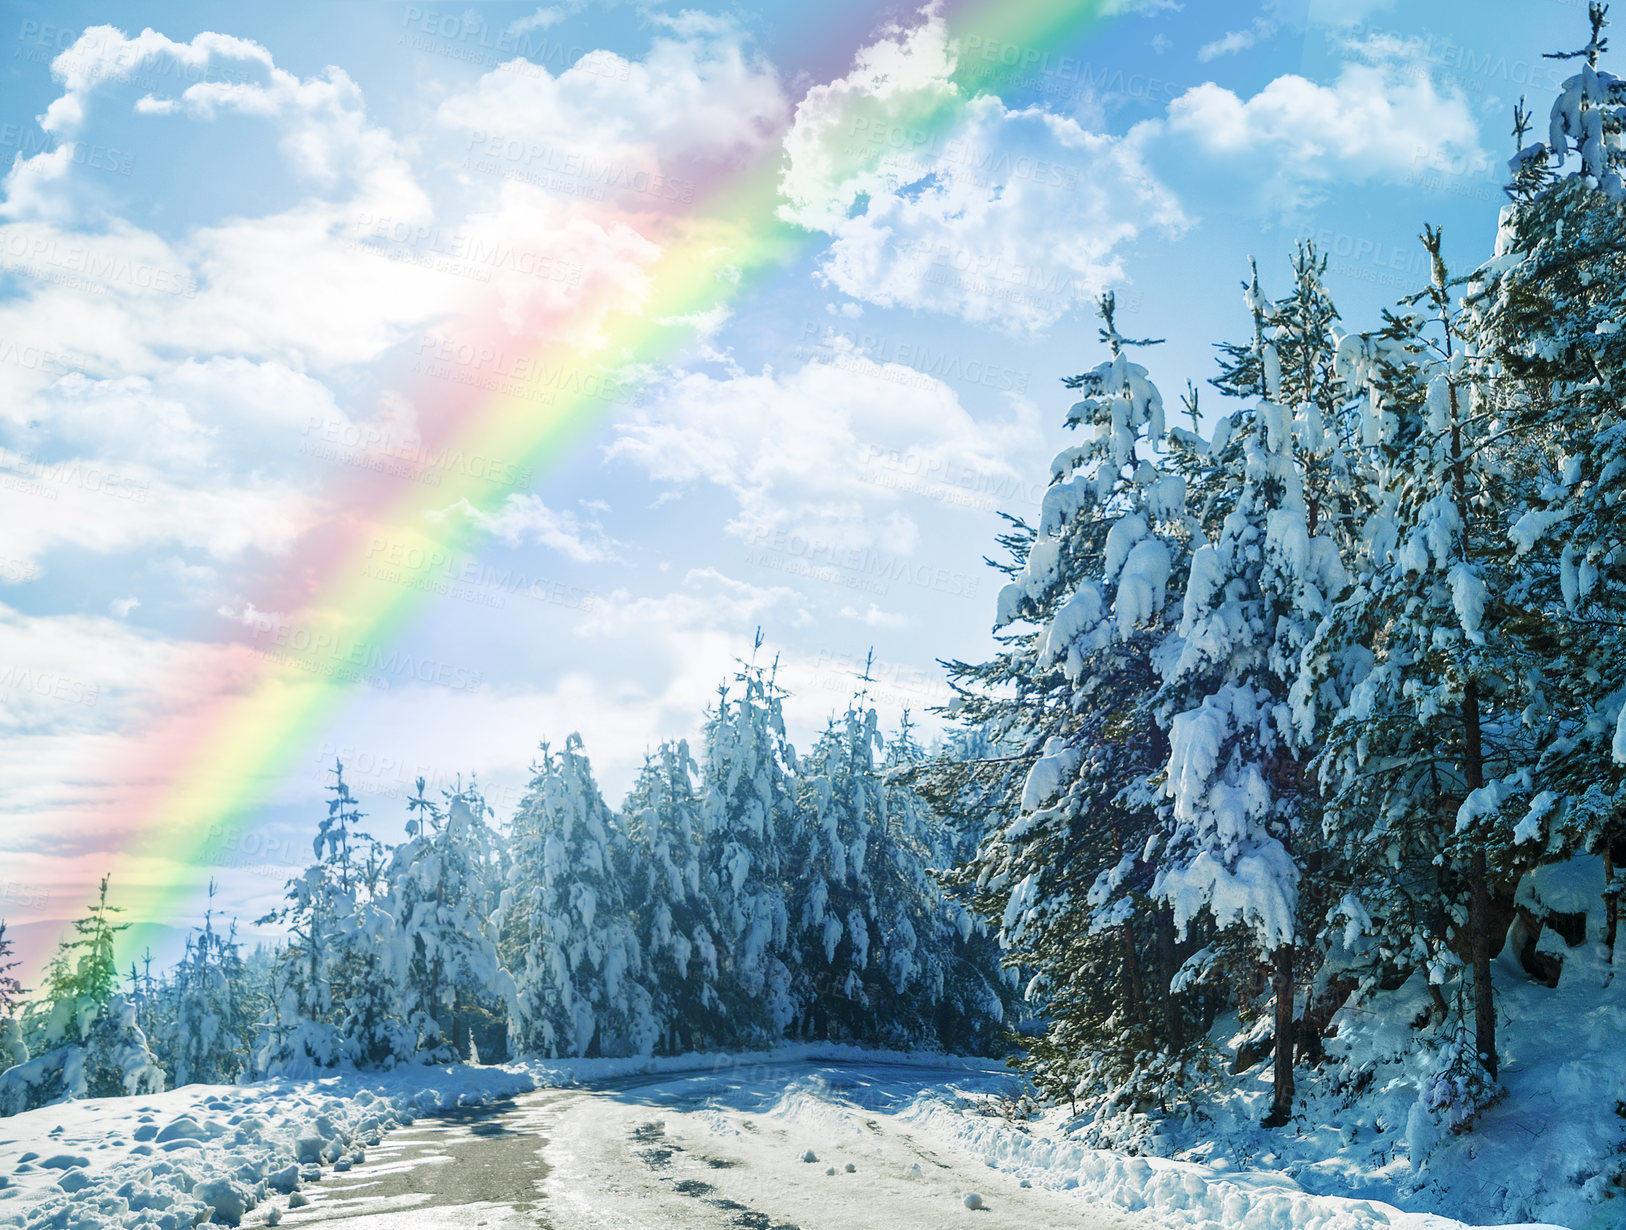 Buy stock photo Winter, rainbow and landscape of forest with snow on trees in countryside, environment or woods. Sunshine, clouds or peace in nature with colors in sky like heaven, magic on earth and ice on plants